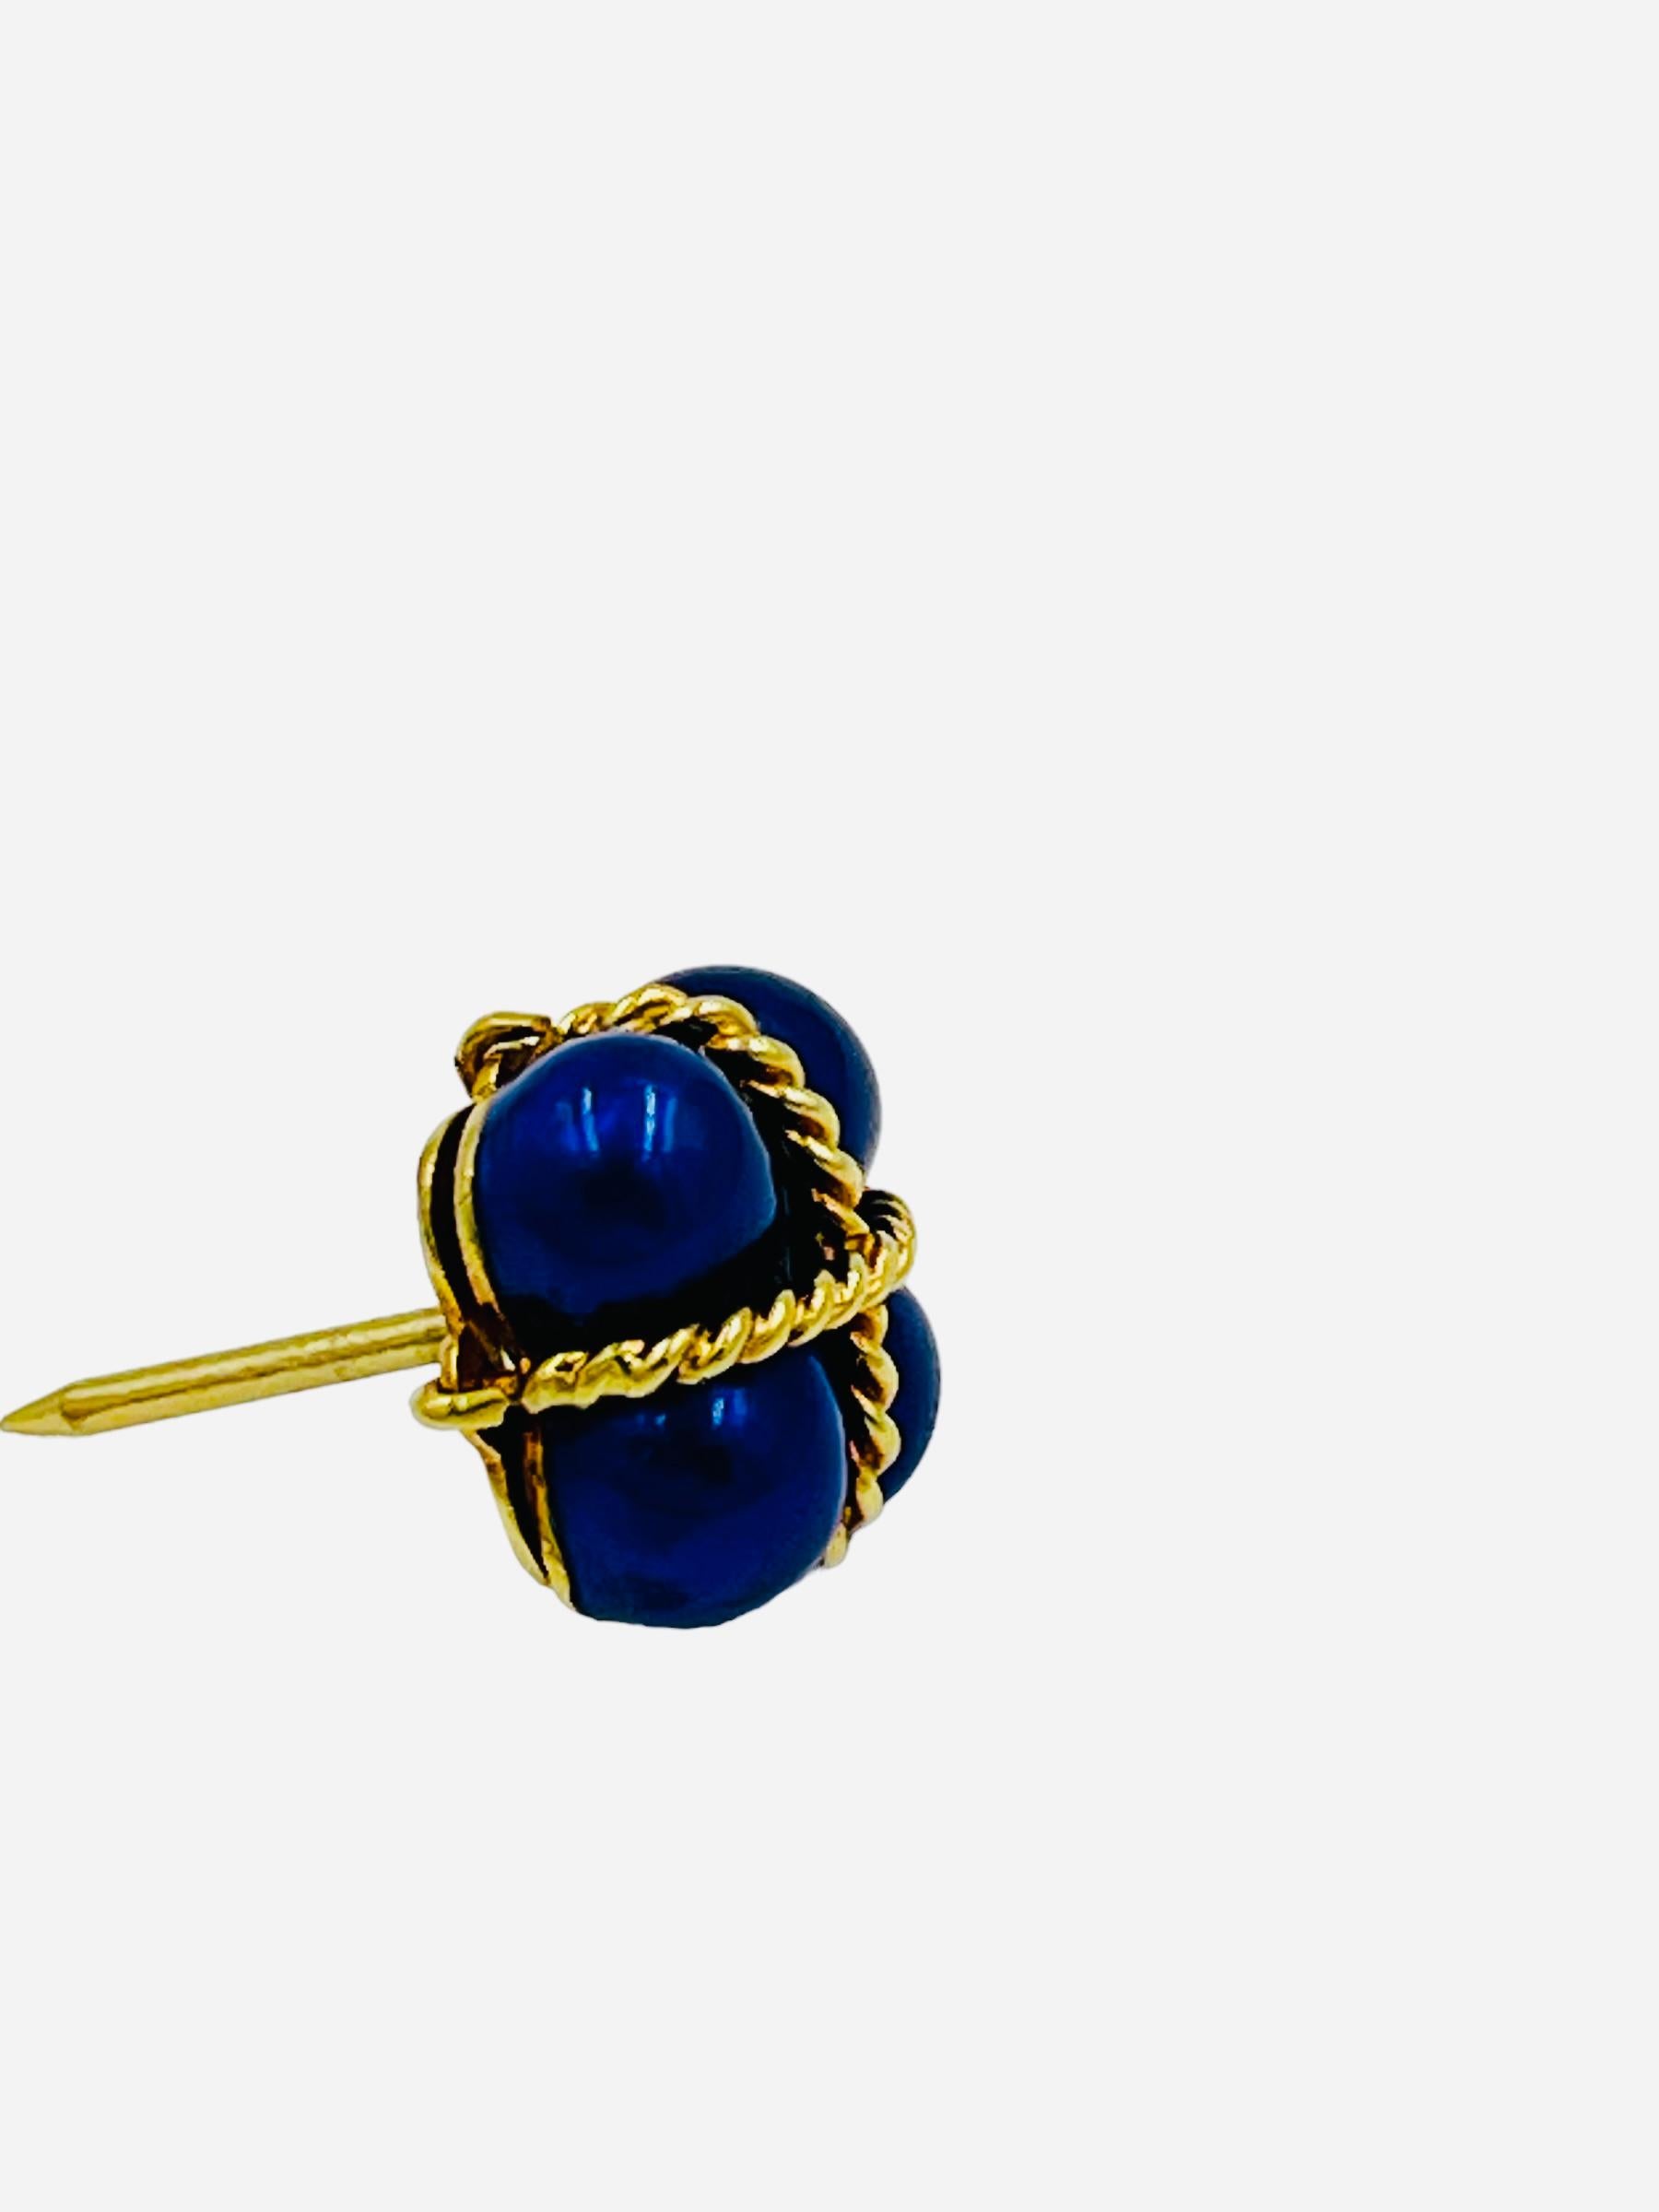 Vintage 18k yellow gold Blue Enamel Lapel pin, Tie tack, circa 1980s.  It's beautifully crafted with a highly detailed twisted rope design wrapped around the enameled tie-tac.

It measures 11mm by 11mm weighing about 3.7 grams without the backing. 